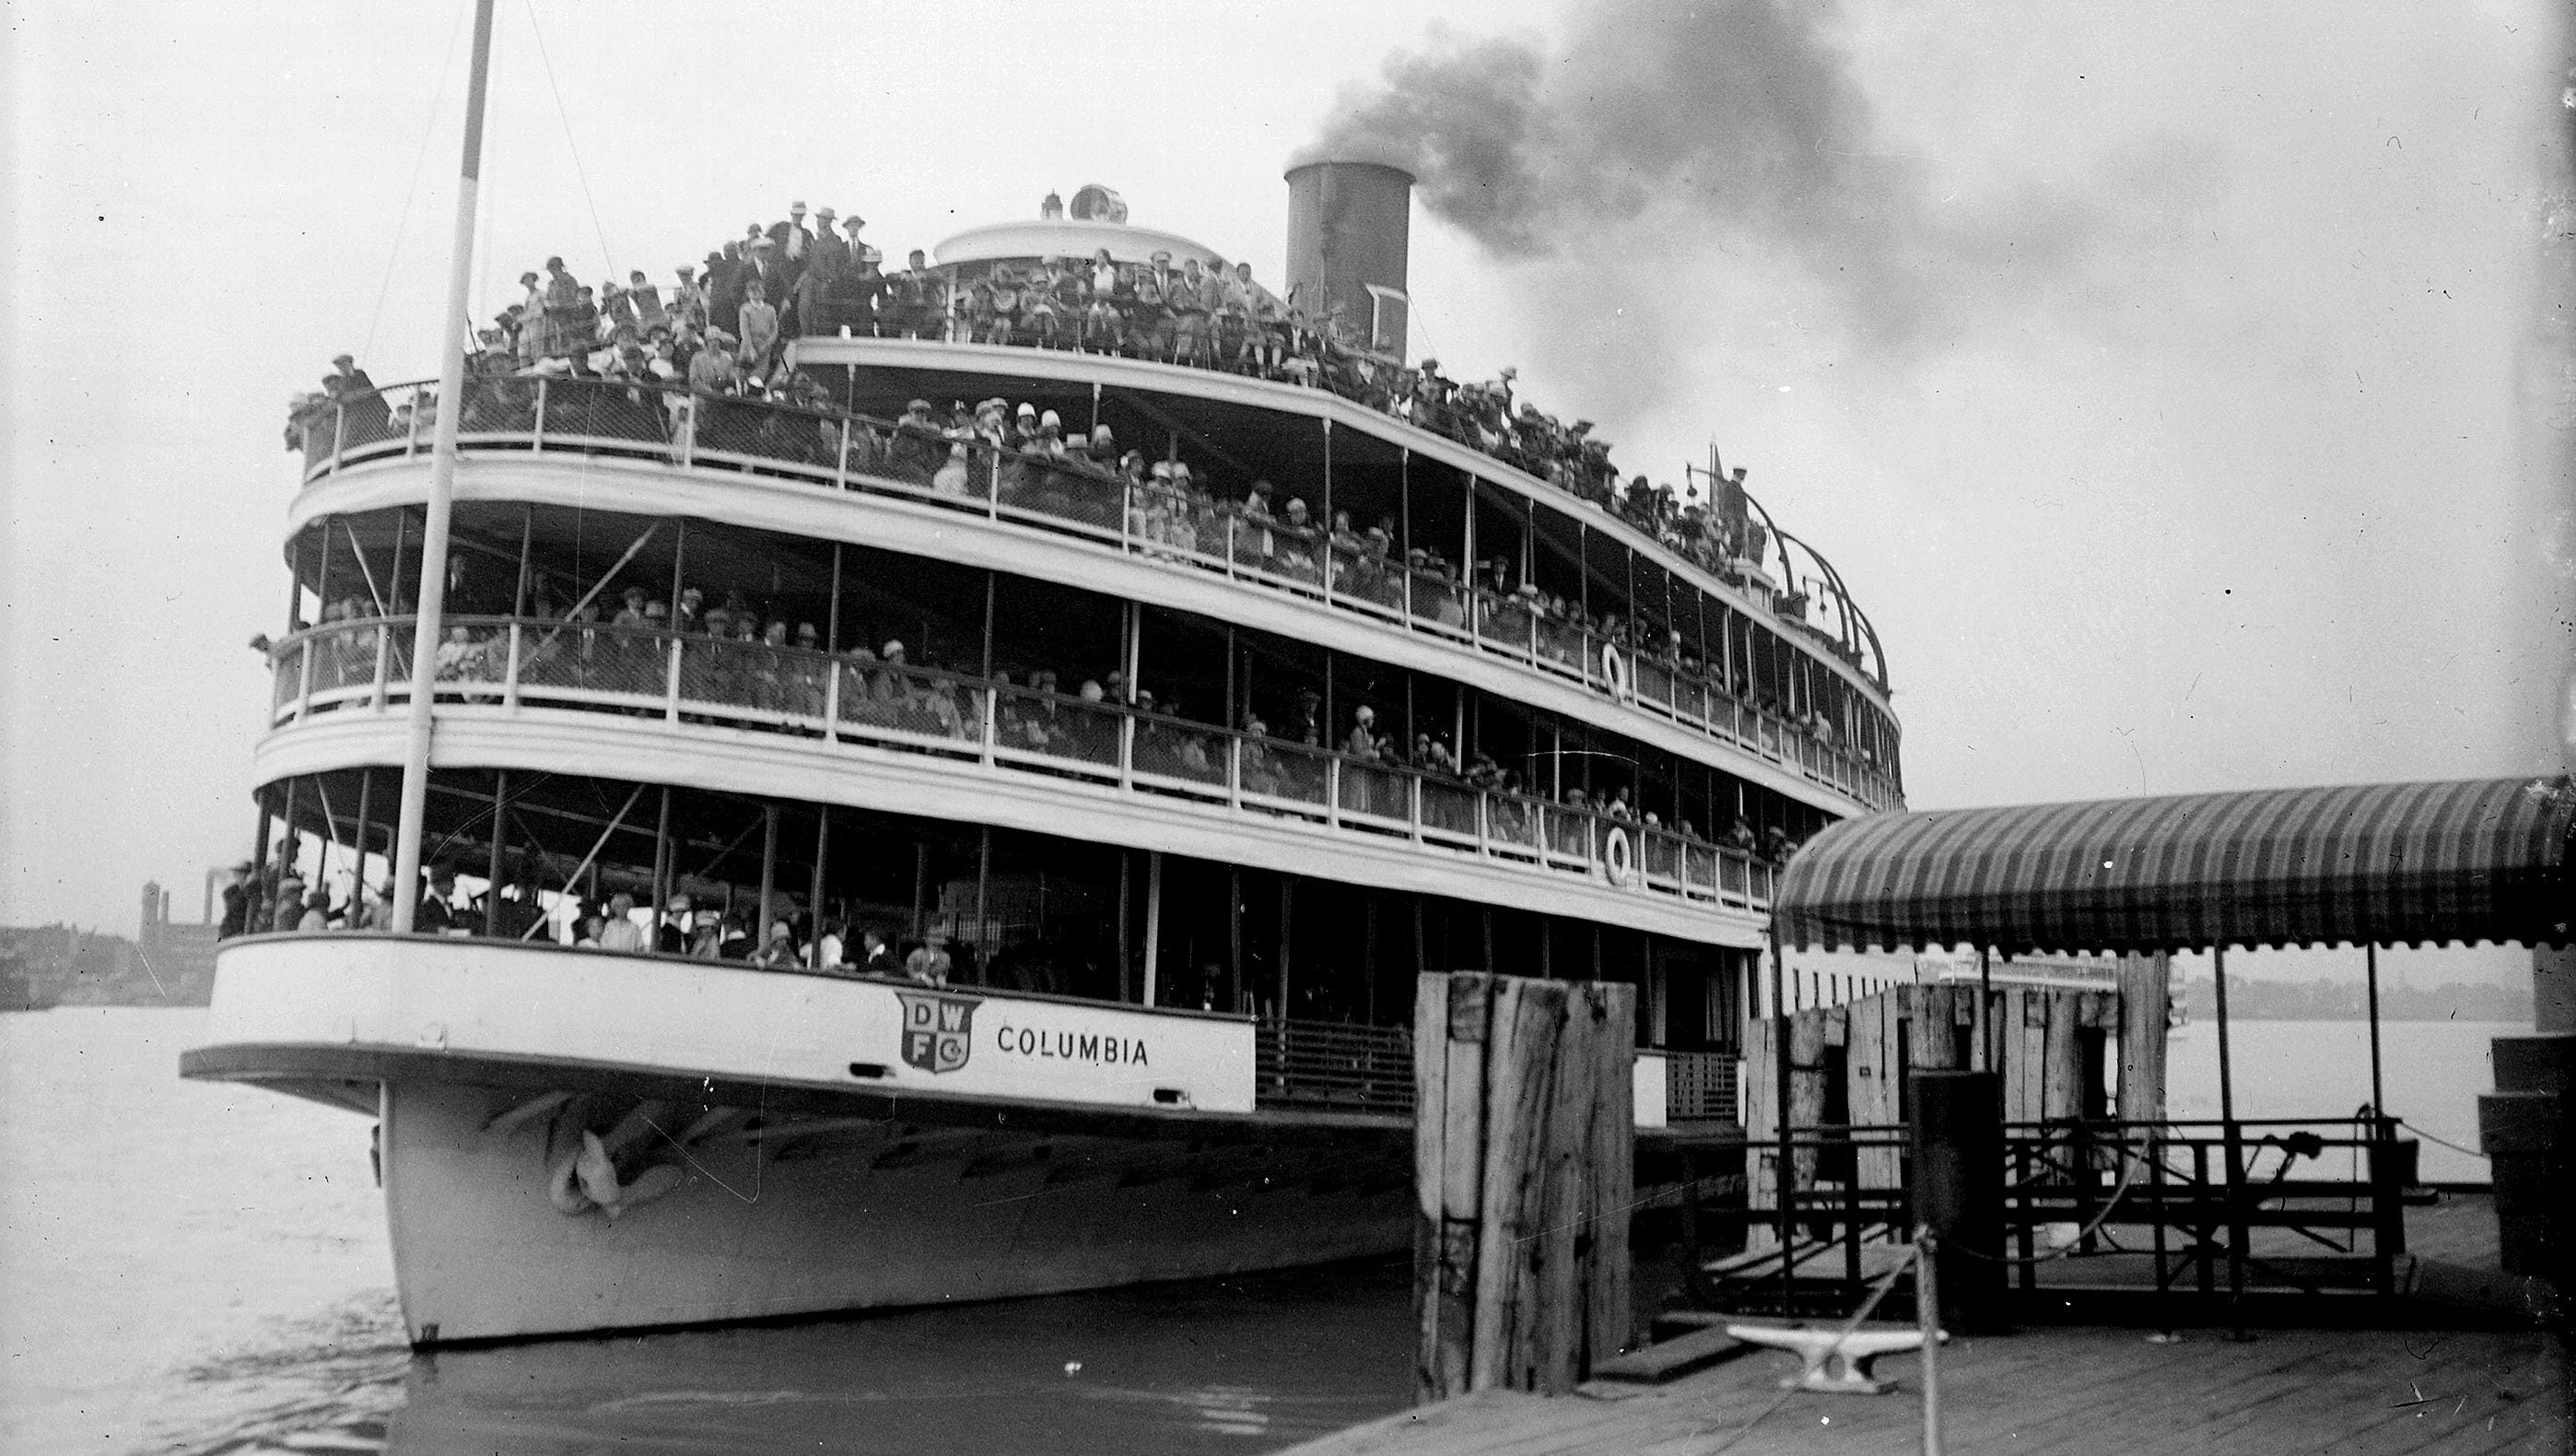 Passengers fill the docked Boblo boat Columbia in the 1920s.  In 1902 and 1910 the steamers Columbia and Ste. Claire were built. They could hold more than 2,500 passengers each, and carried as many as 800,000 visitors to Boblo Island yearly in the island's heyday in the '60s and '70s.